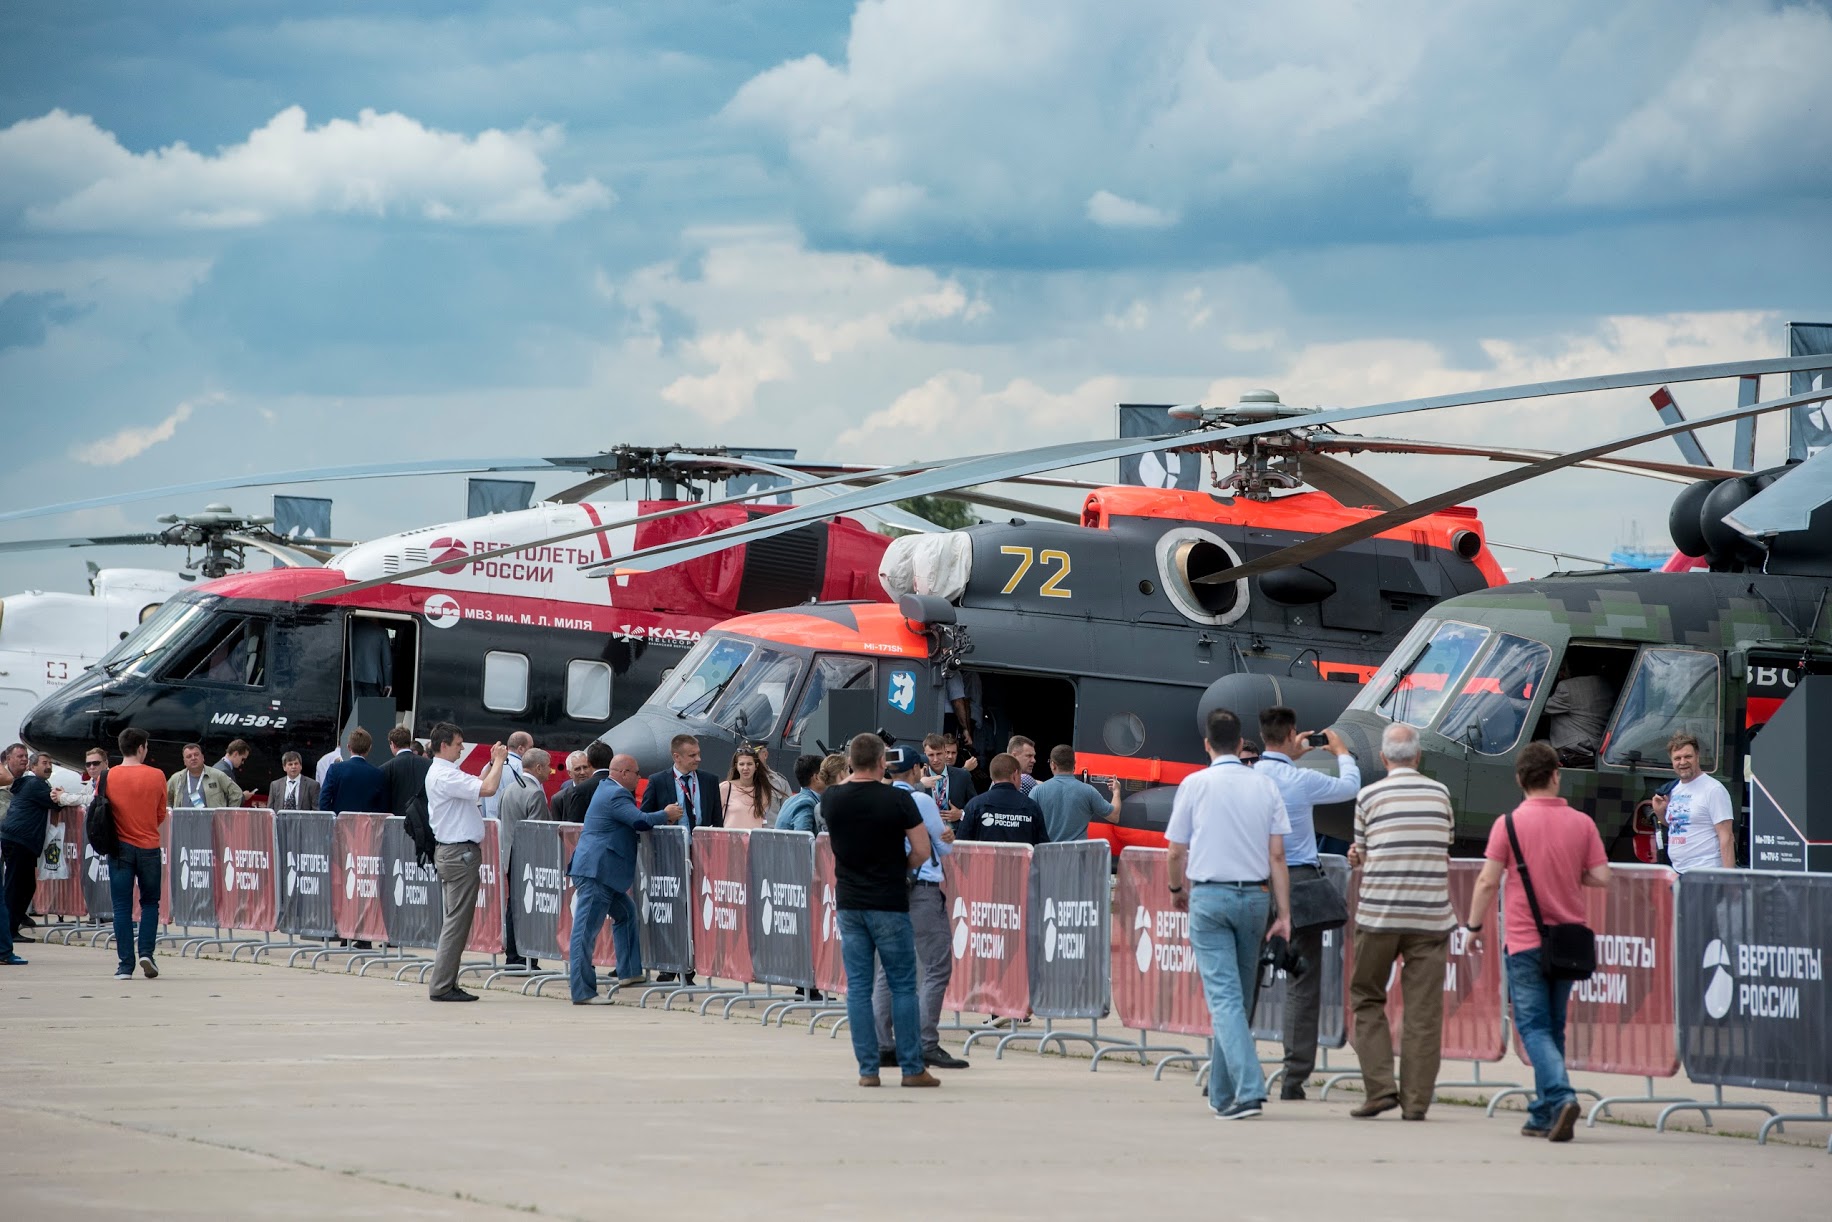 From August 27 to September 1, Zhukovsky Will Host the International Aviation and Space Salon